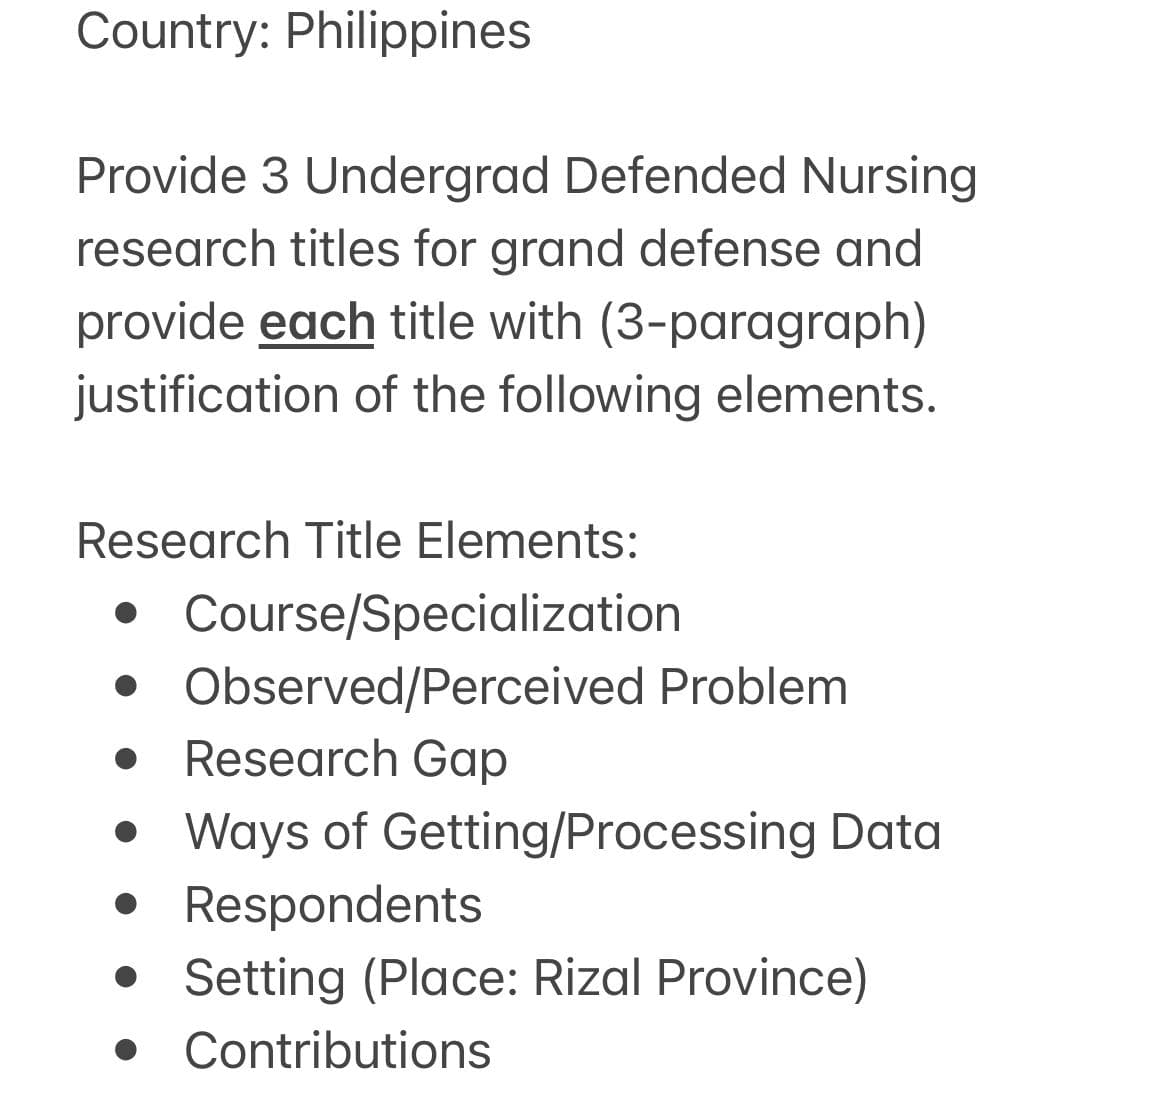 Country: Philippines
Provide 3 Undergrad Defended Nursing
research titles for grand defense and
provide each title with (3-paragraph)
justification of the following elements.
Research Title Elements:
• Course/Specialization
• Observed/Perceived Problem
• Research Gap
• Ways of Getting/Processing Data
• Respondents
• Setting (Place: Rizal Province)
• Contributions